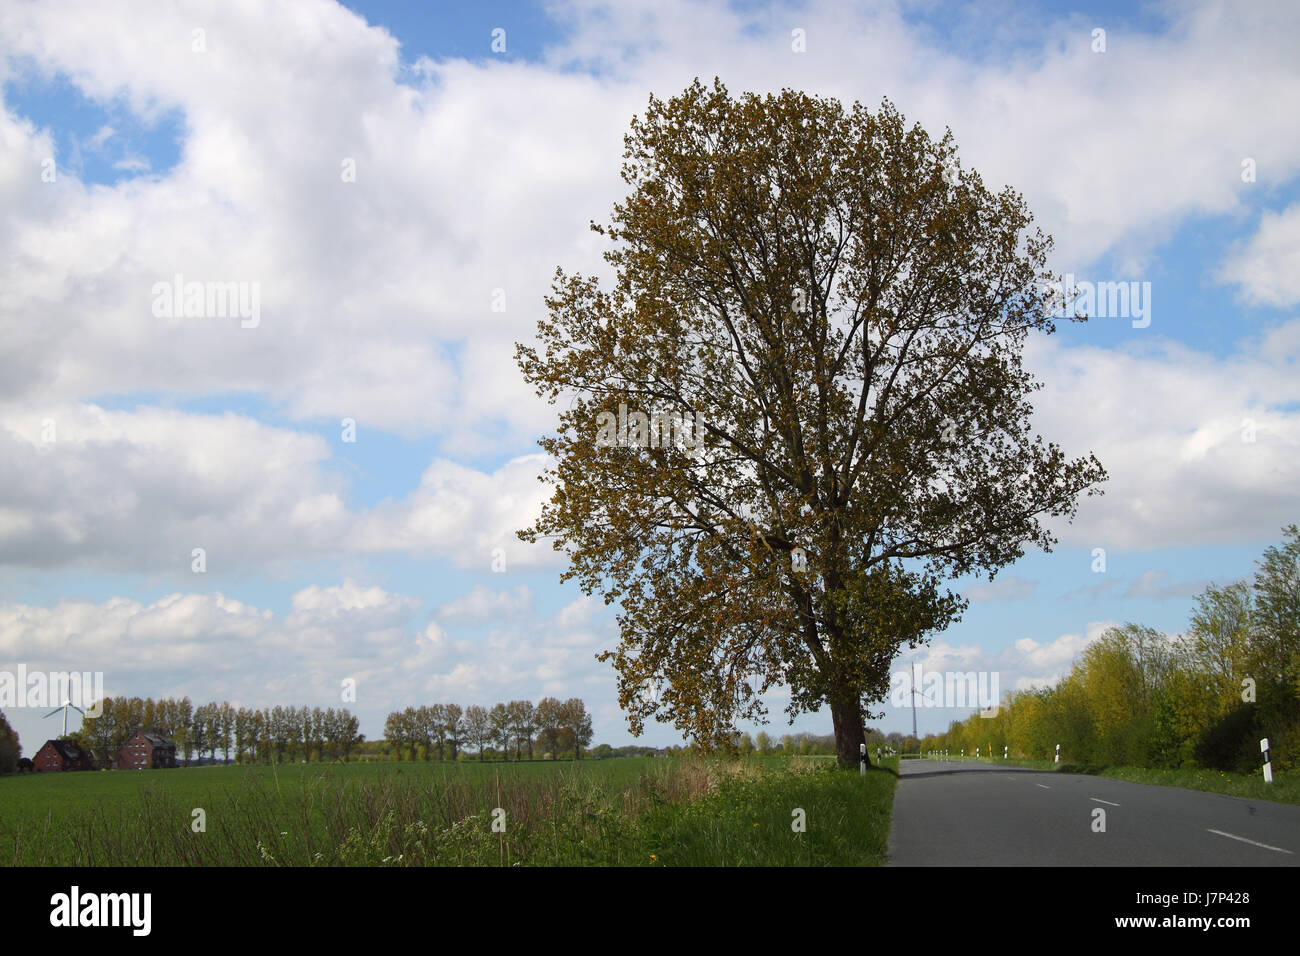 tree trees field spring eco firmament sky clouds tree trees agriculture farming Stock Photo